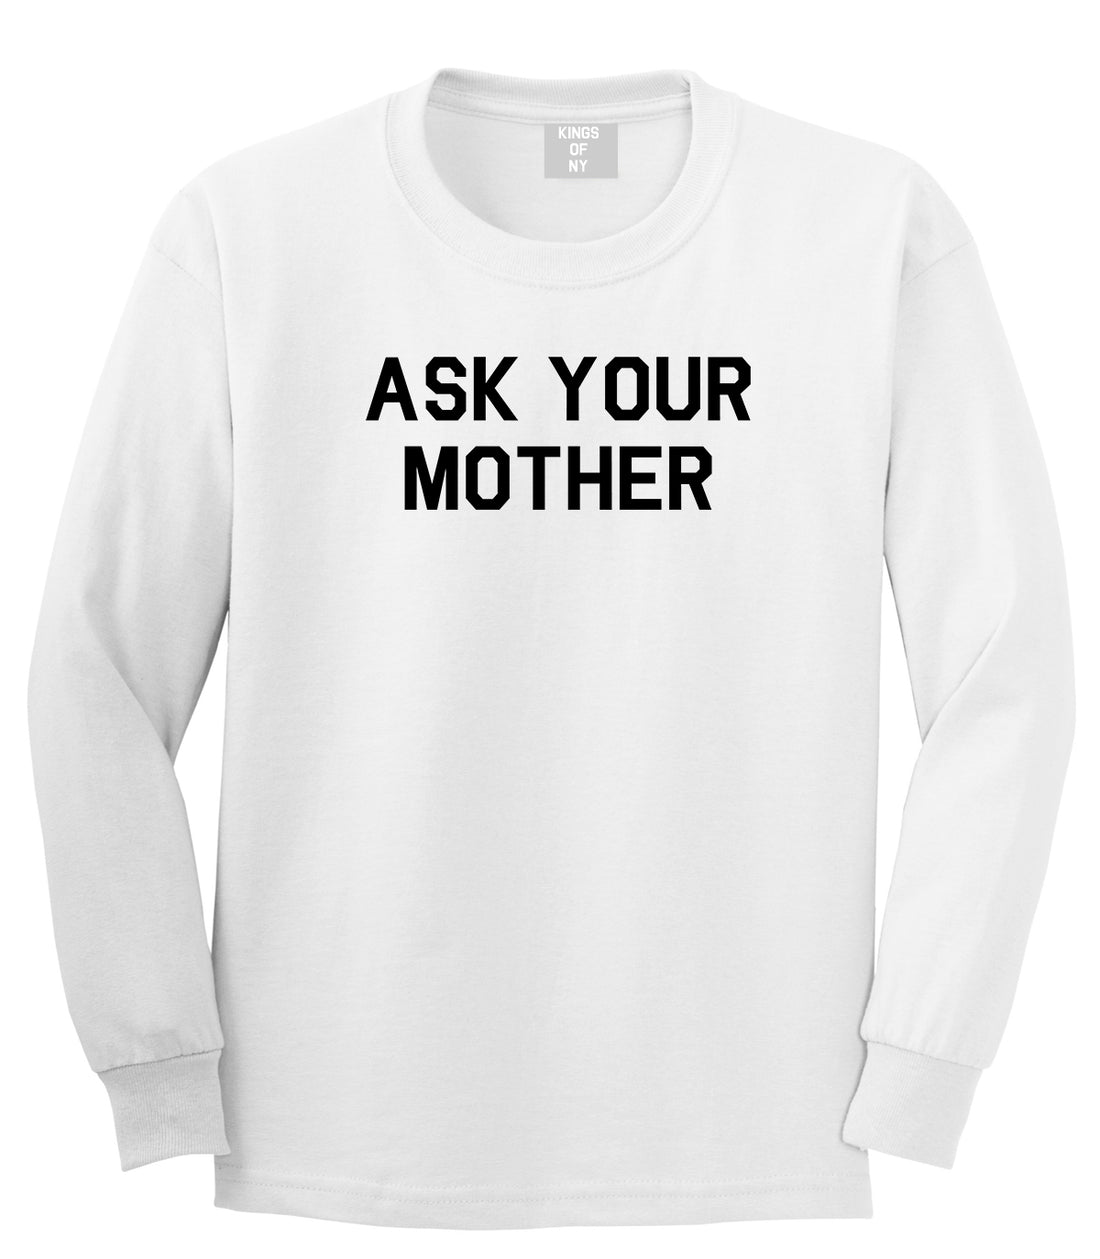 Ask Your Mother Funny Dad Mens Long Sleeve T-Shirt White by Kings Of NY